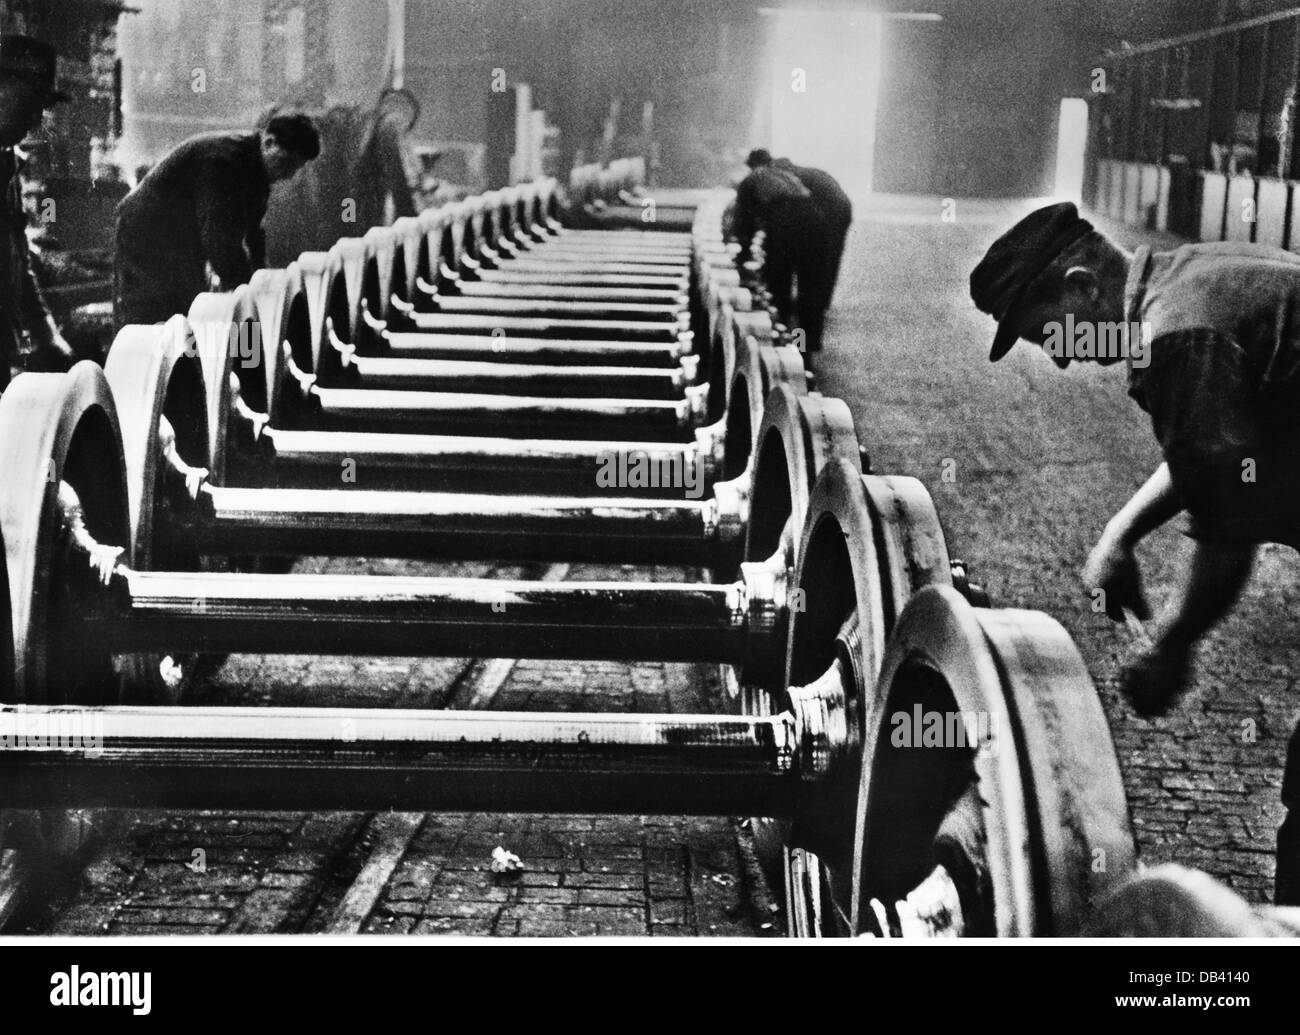 industry, metal, Krupp, production of wheelsets for wagons, circa 1920, Additional-Rights-Clearences-Not Available Stock Photo